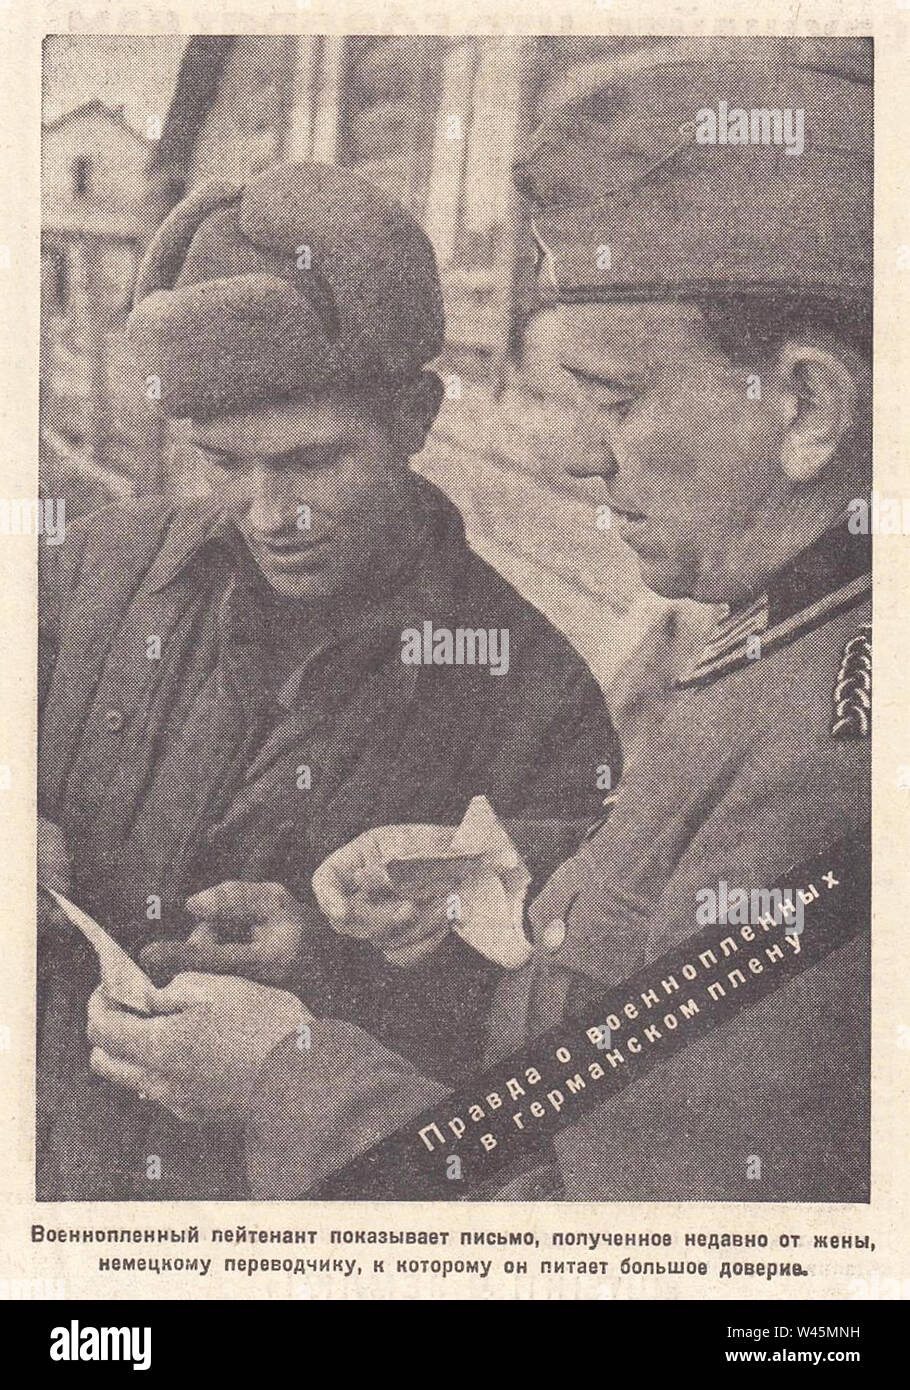 Prisoner of war lieutenant shows a letter received recently from his wife. The truth about prisoners of war in German captivity. Photo from the newspaper of the 1940s. Stock Photo